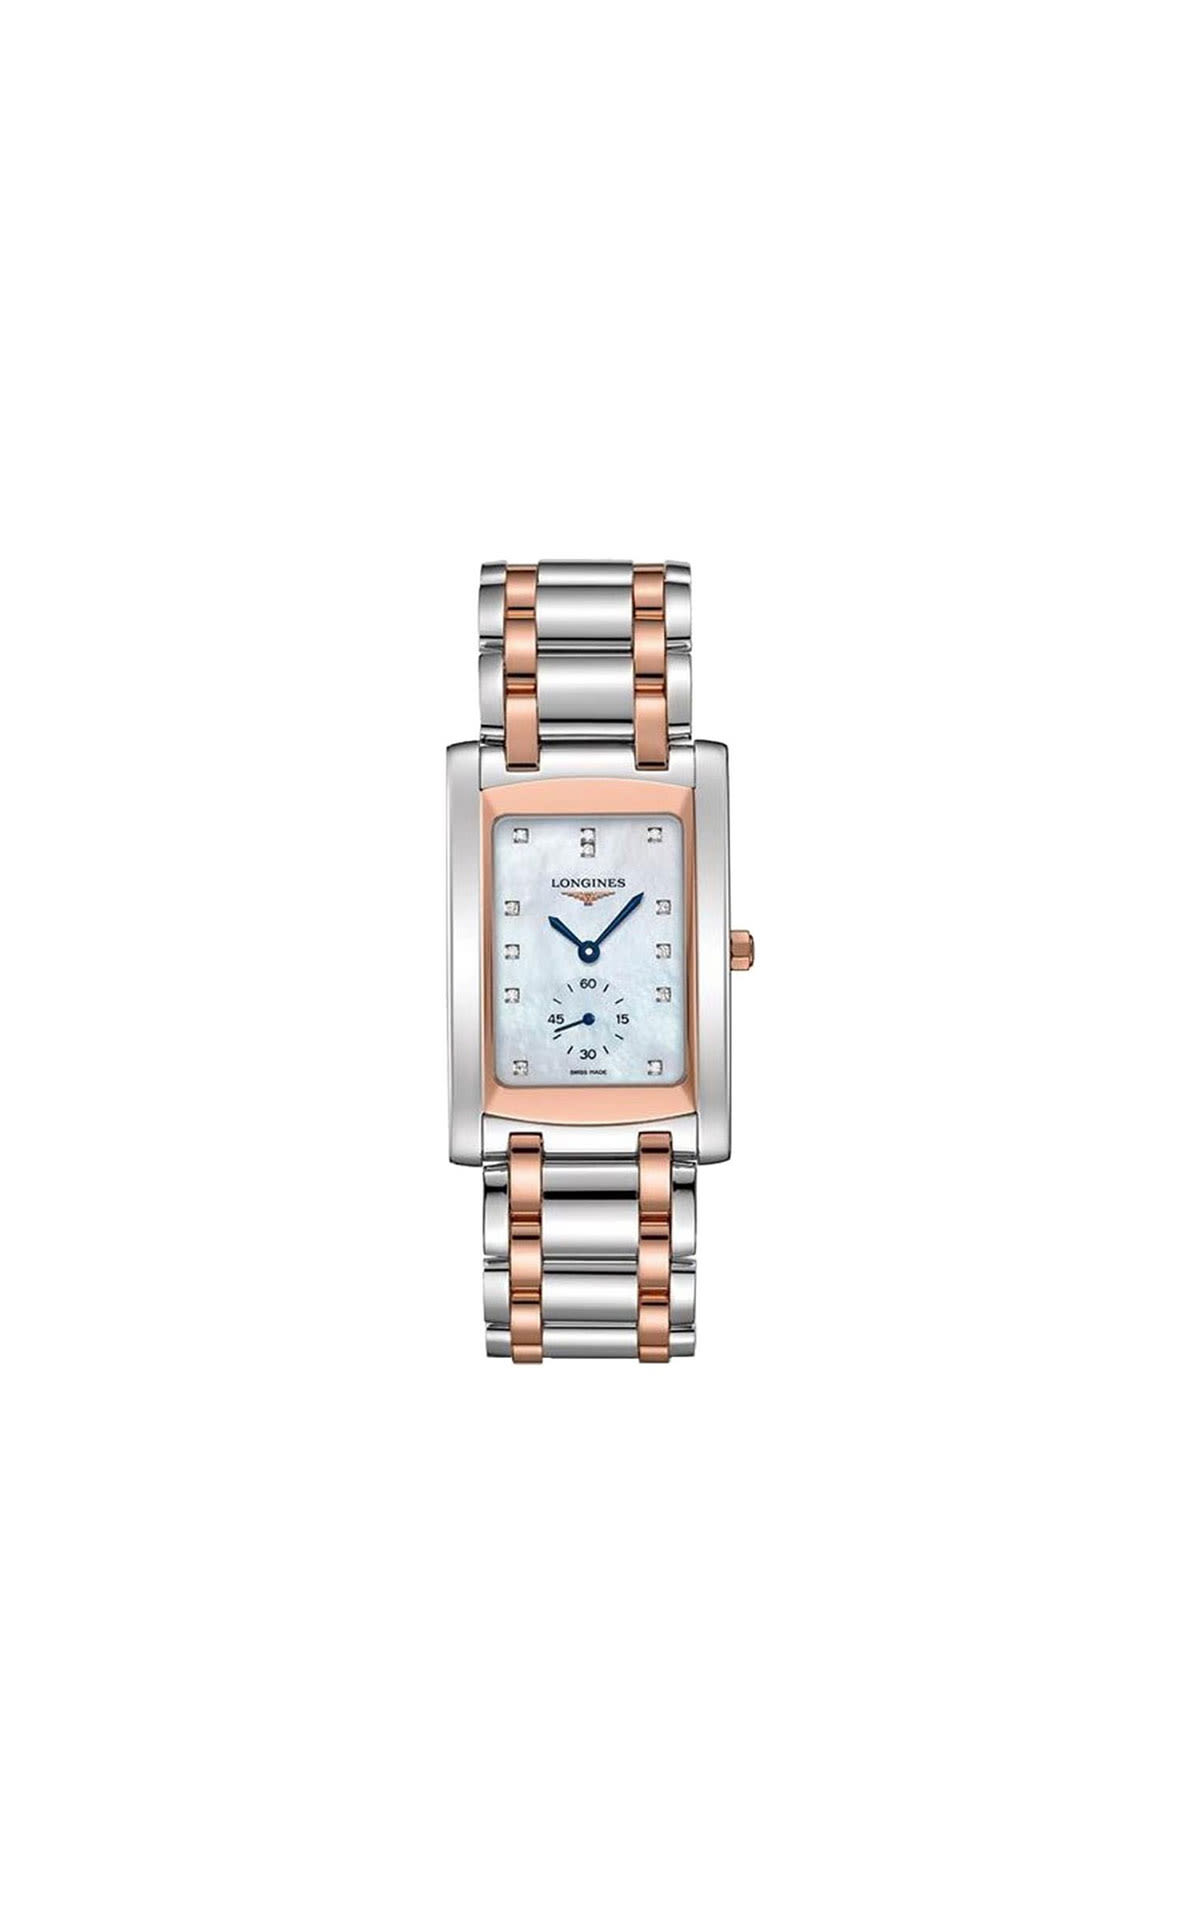 Hour Passion Longines dolce vita classic ladies from Bicester Village